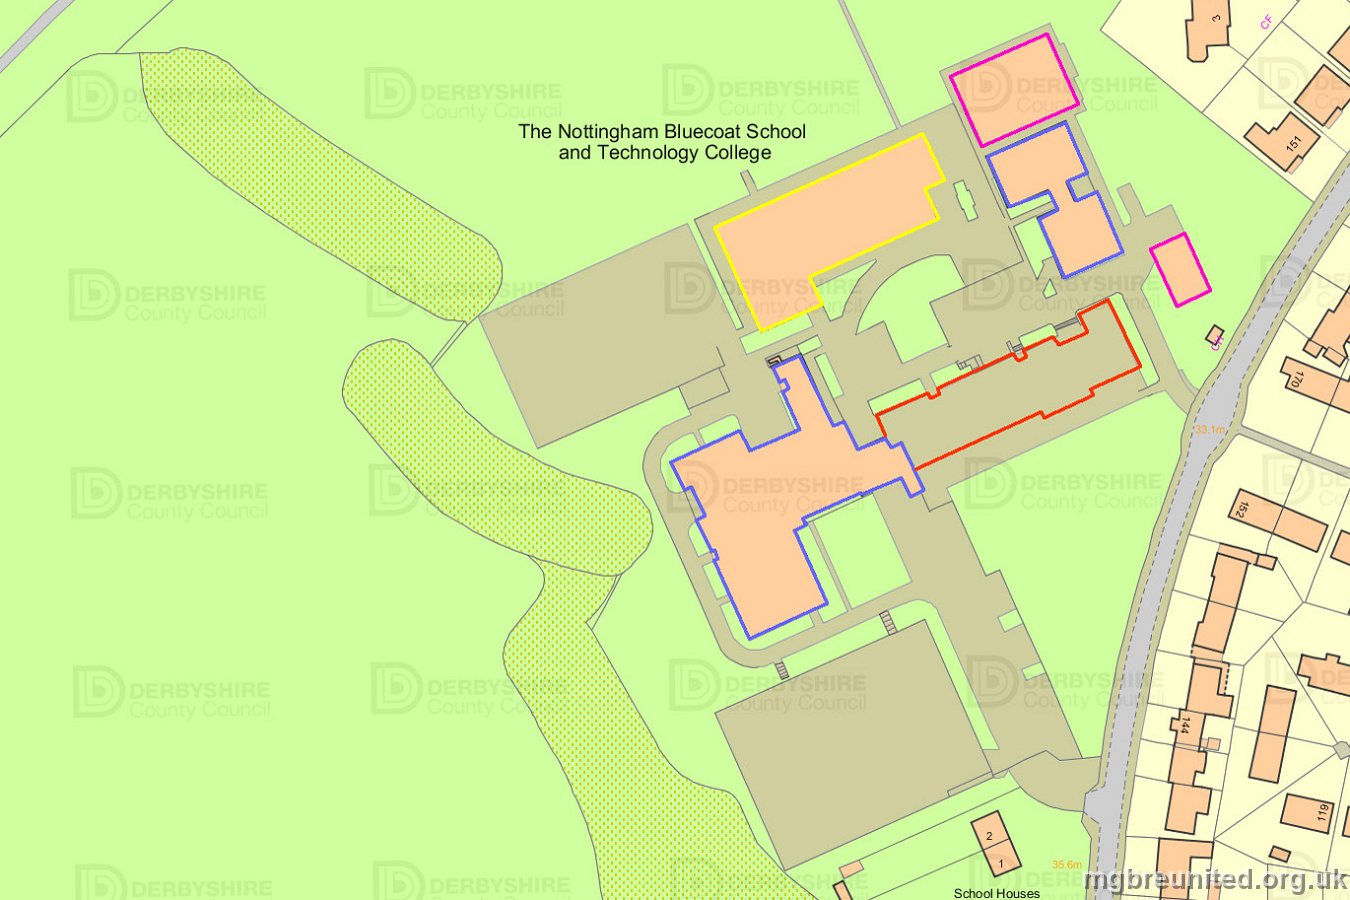 Map 2020 Bluecoat School with Margaret Glen-Bott) superimposed Map shows the various stages of building development: KEY: RED = MGB demolished BLUE = MGB Retained and probably reclad. PURPLE = MGB or BLUECOAT built sometime after the 1960s YELLOW = BLUECOAT c. 2015 Old 1950s 1960's Margaret Glen-Bott = BLUE and RED